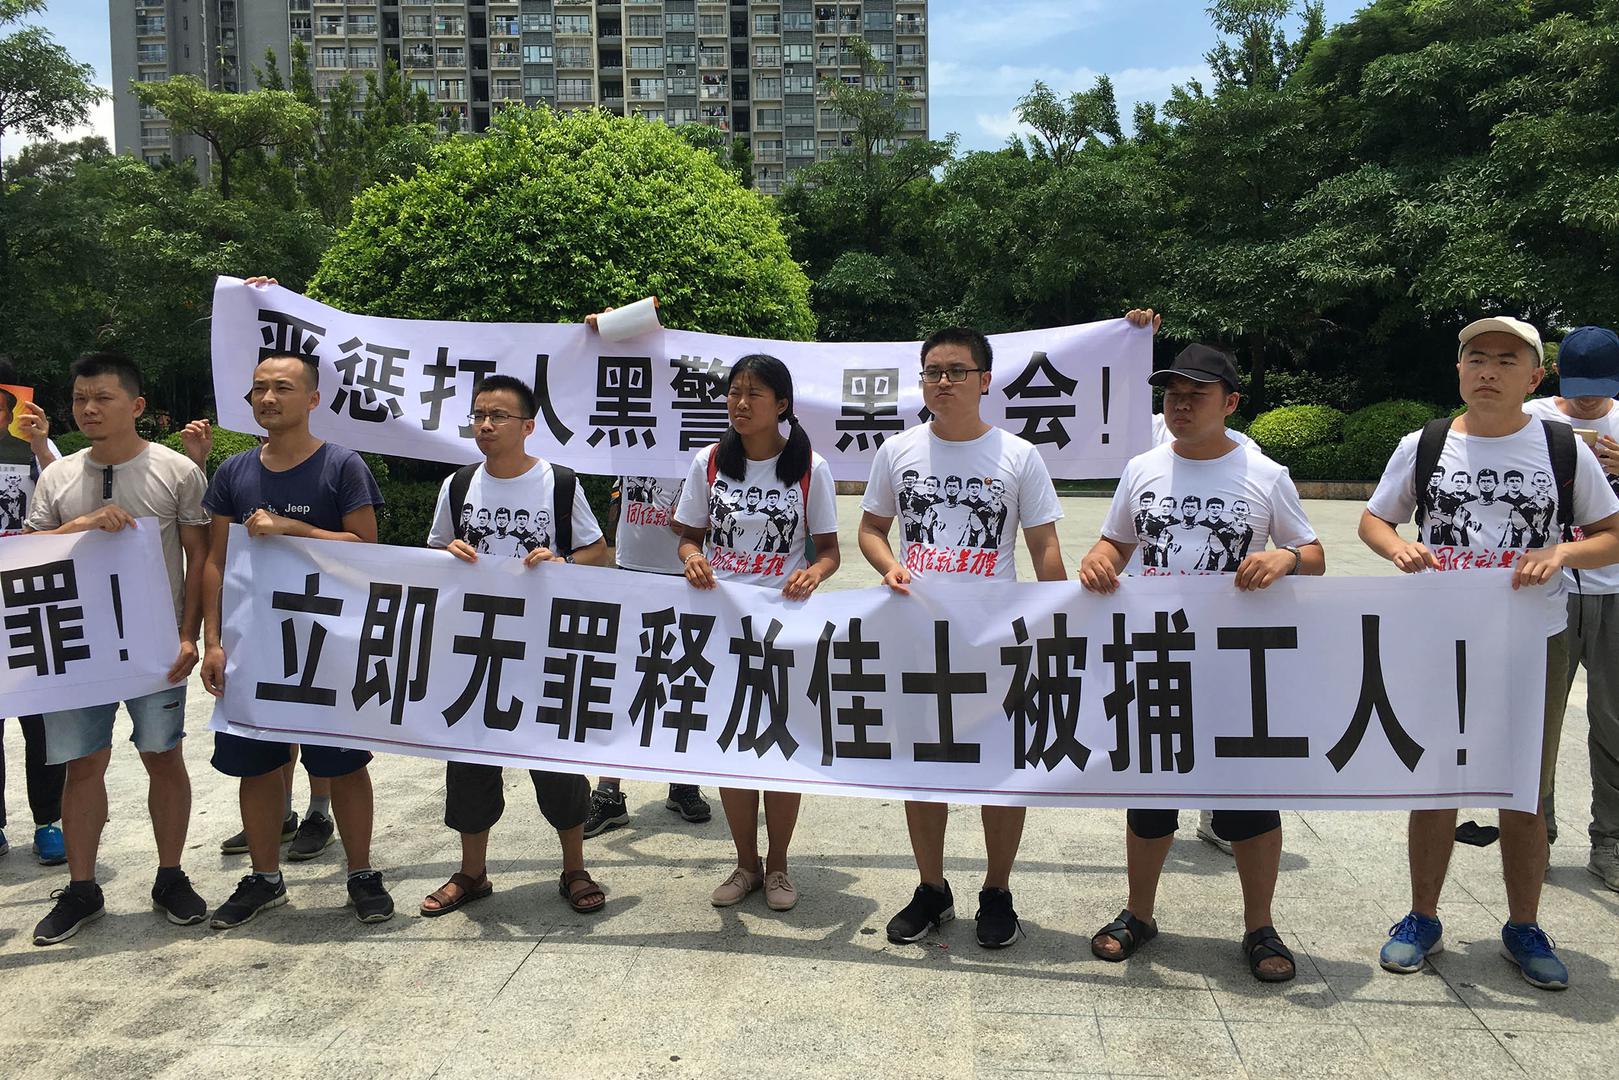 People hold banners at a demonstration in support of factory workers of Jasic Technology, outside Yanziling police station in Pingshan district, Shenzhen, Guangdong province, China August 6, 2018.